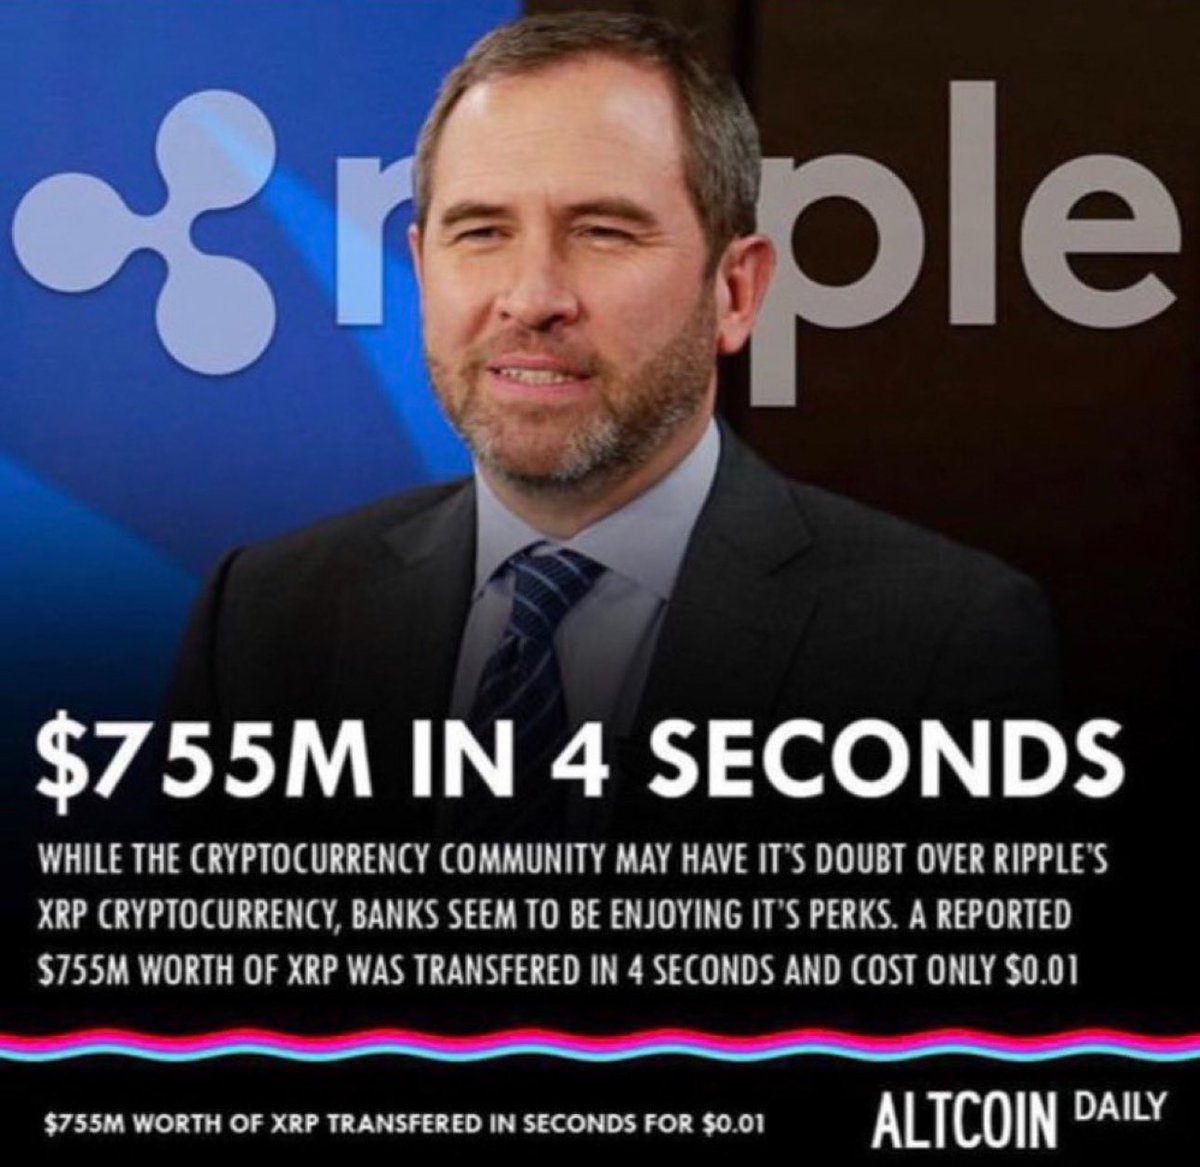 A bank just sent $755M worth of $XRP and it was transferred in 4 seconds and cost only $0.01.

That’s it. That’s the tweet. This is why #XRP will eventually win.
#Crypto